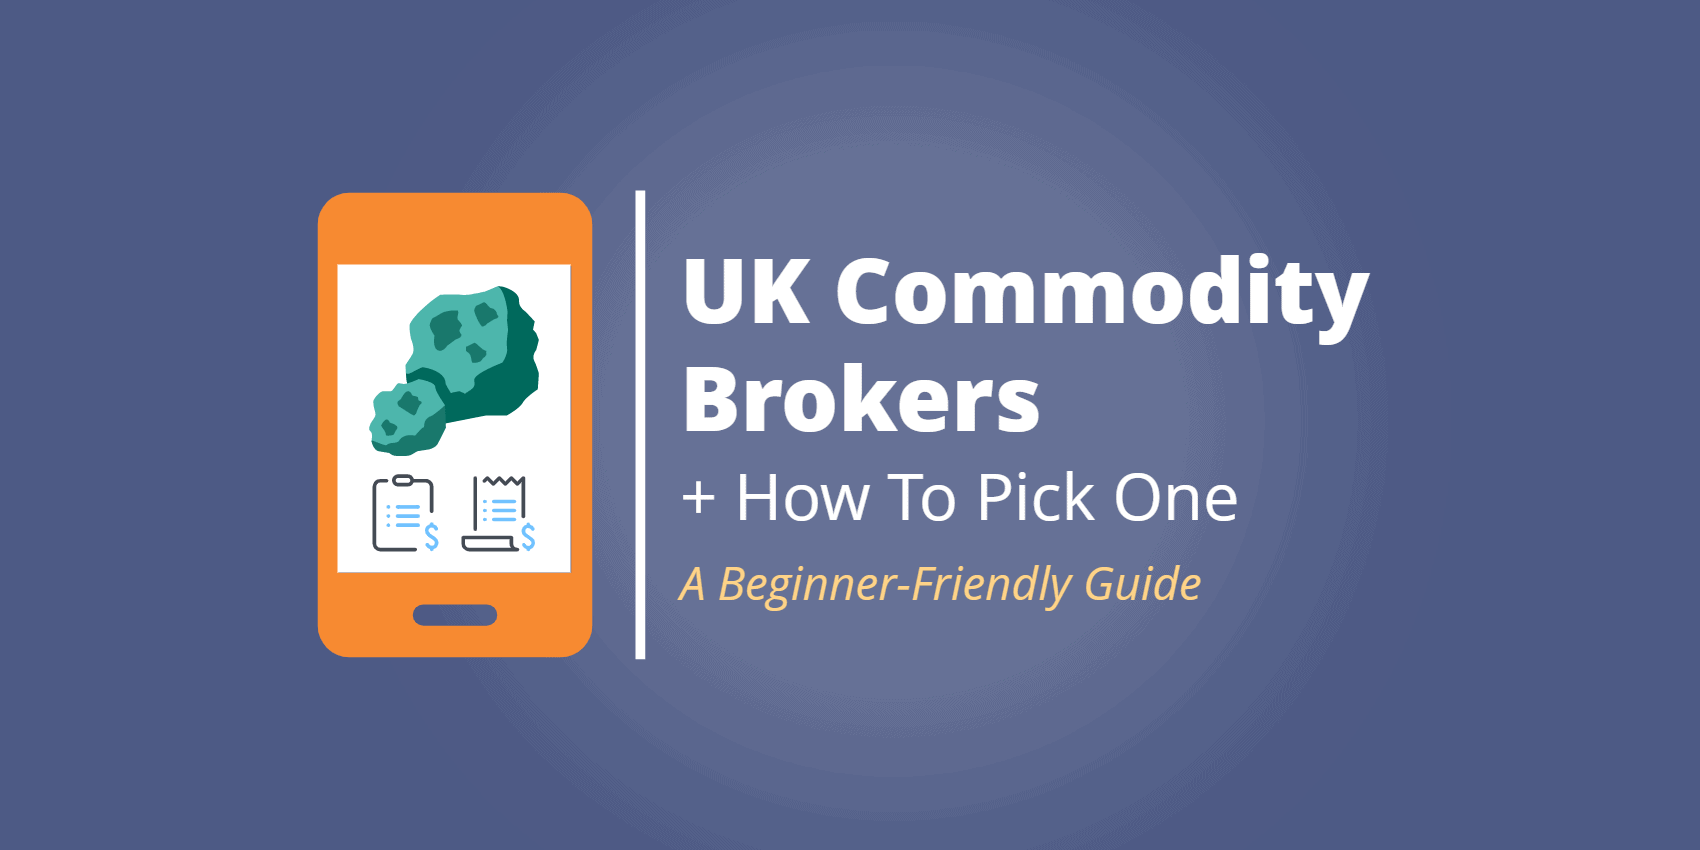 Best Online Brokers & Trading Platforms in The UK   Commodity.com